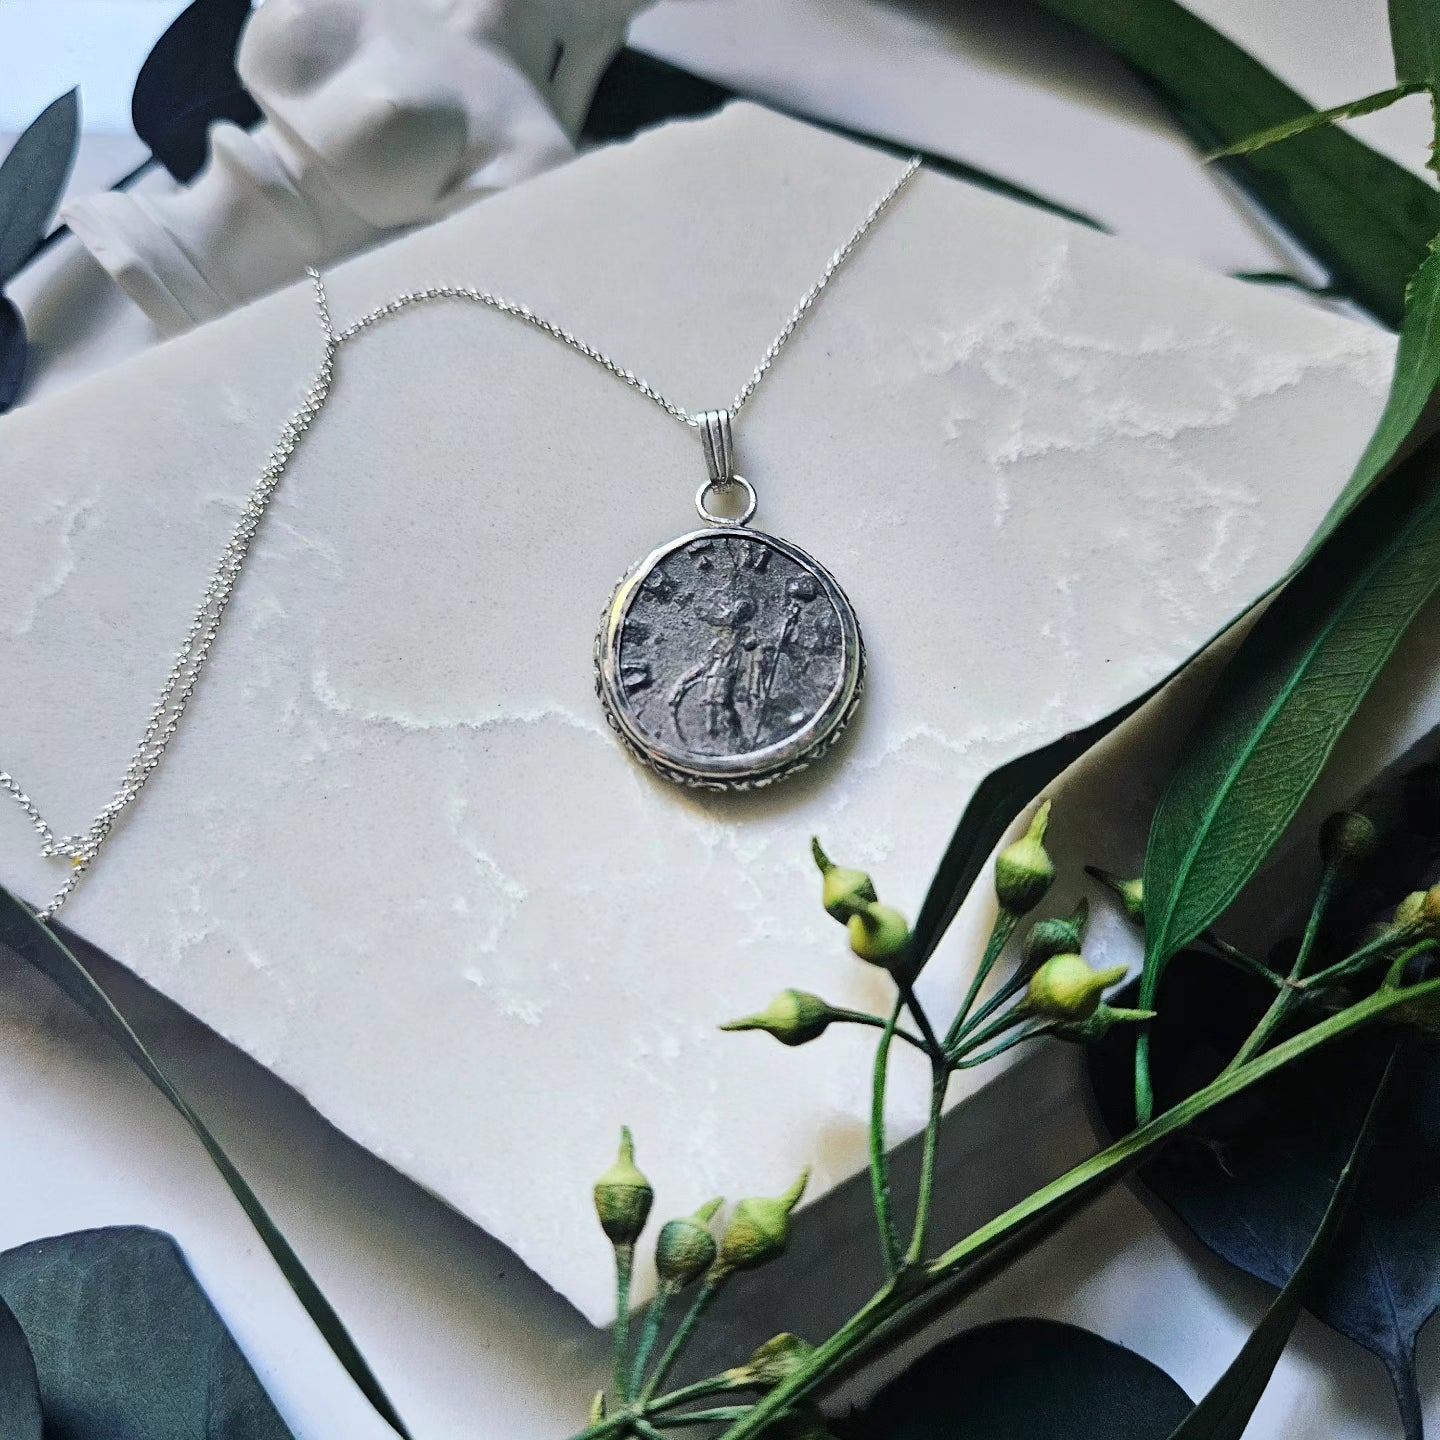 "When in Rome": Real Ancient Coin Necklace (Gallienus/Virtus)